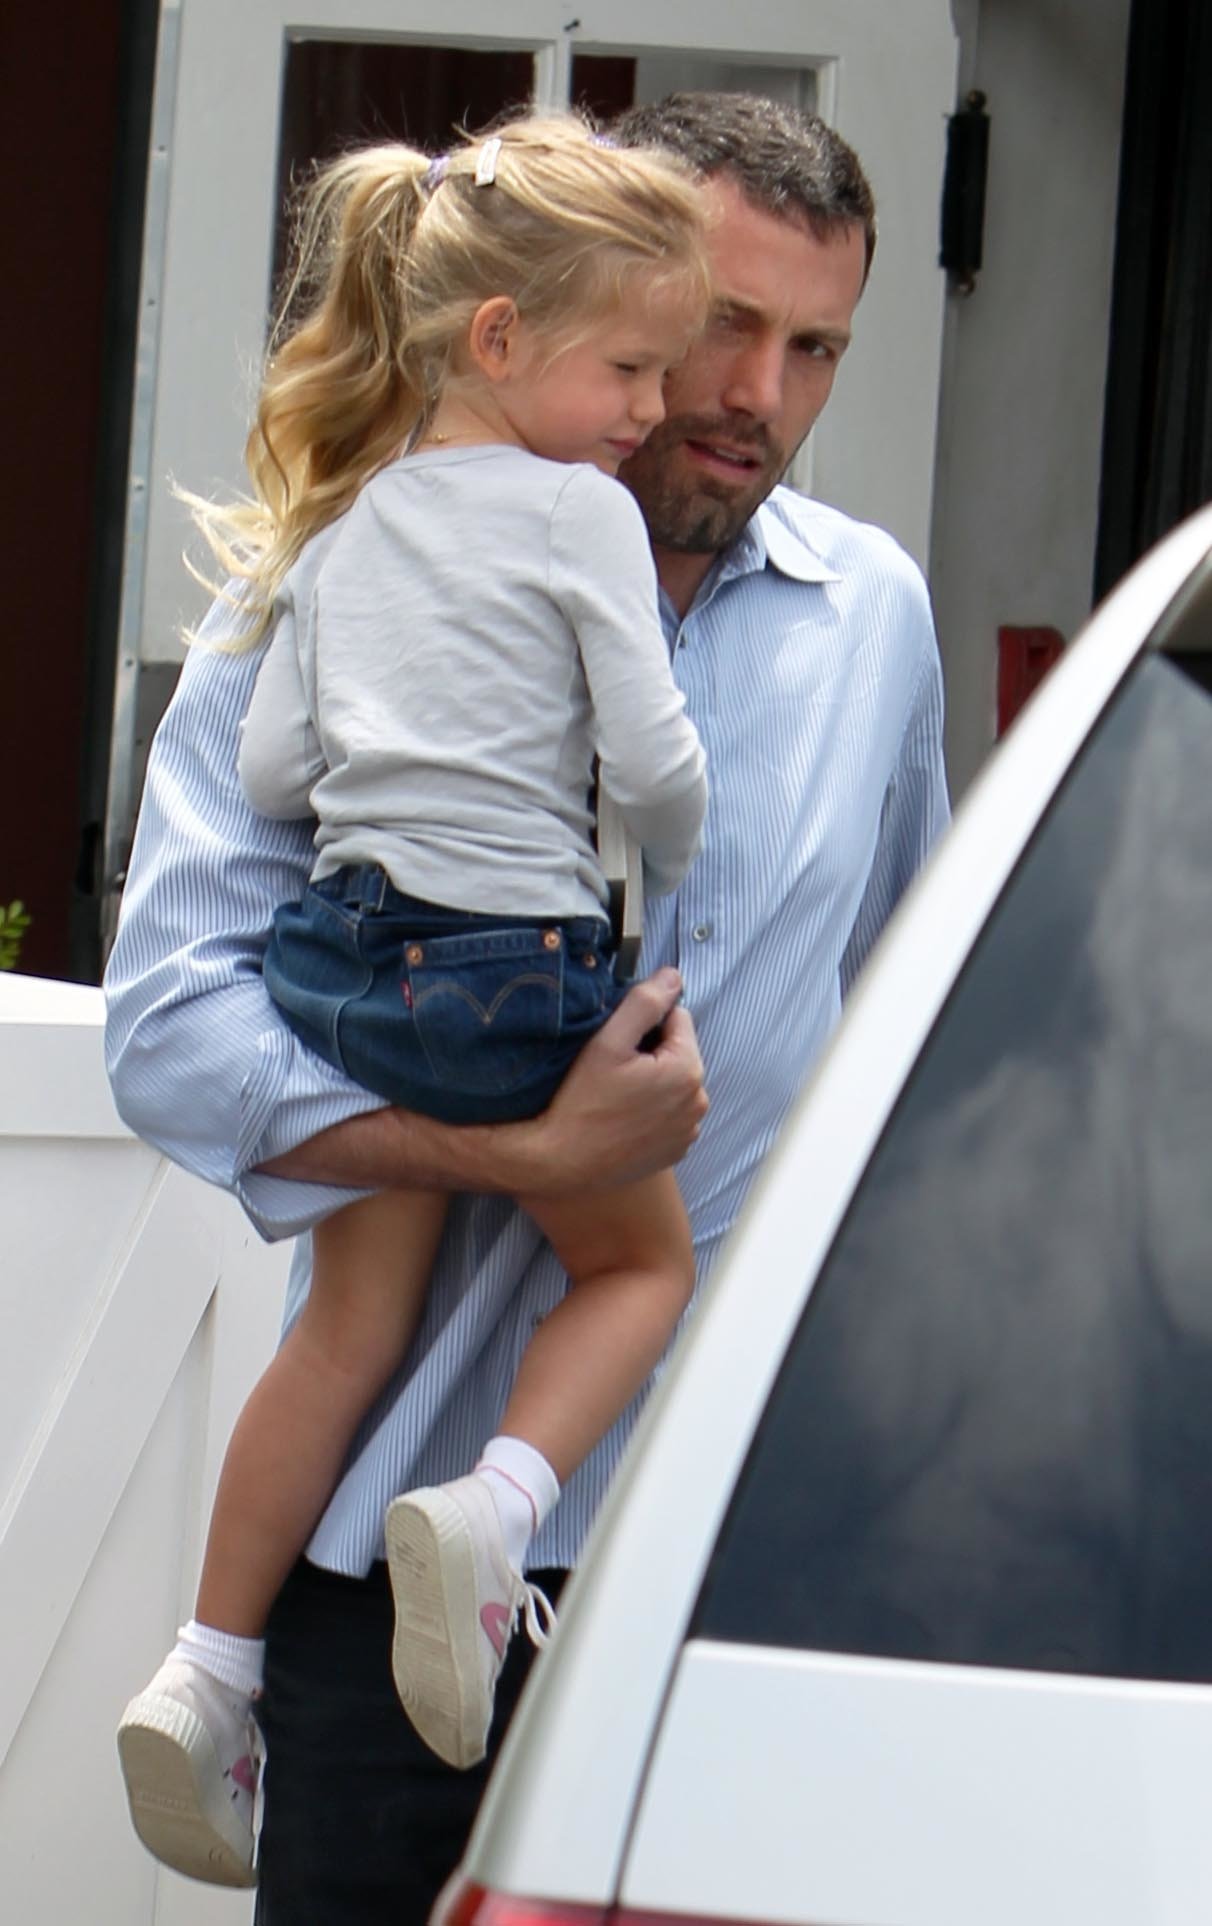 Ben Affleck and one of his two daughters at The Brentwood Country Mart I  Brentwood, California, on June 12, 2010. | Source: Philip Ramey/Corbis/Getty Images